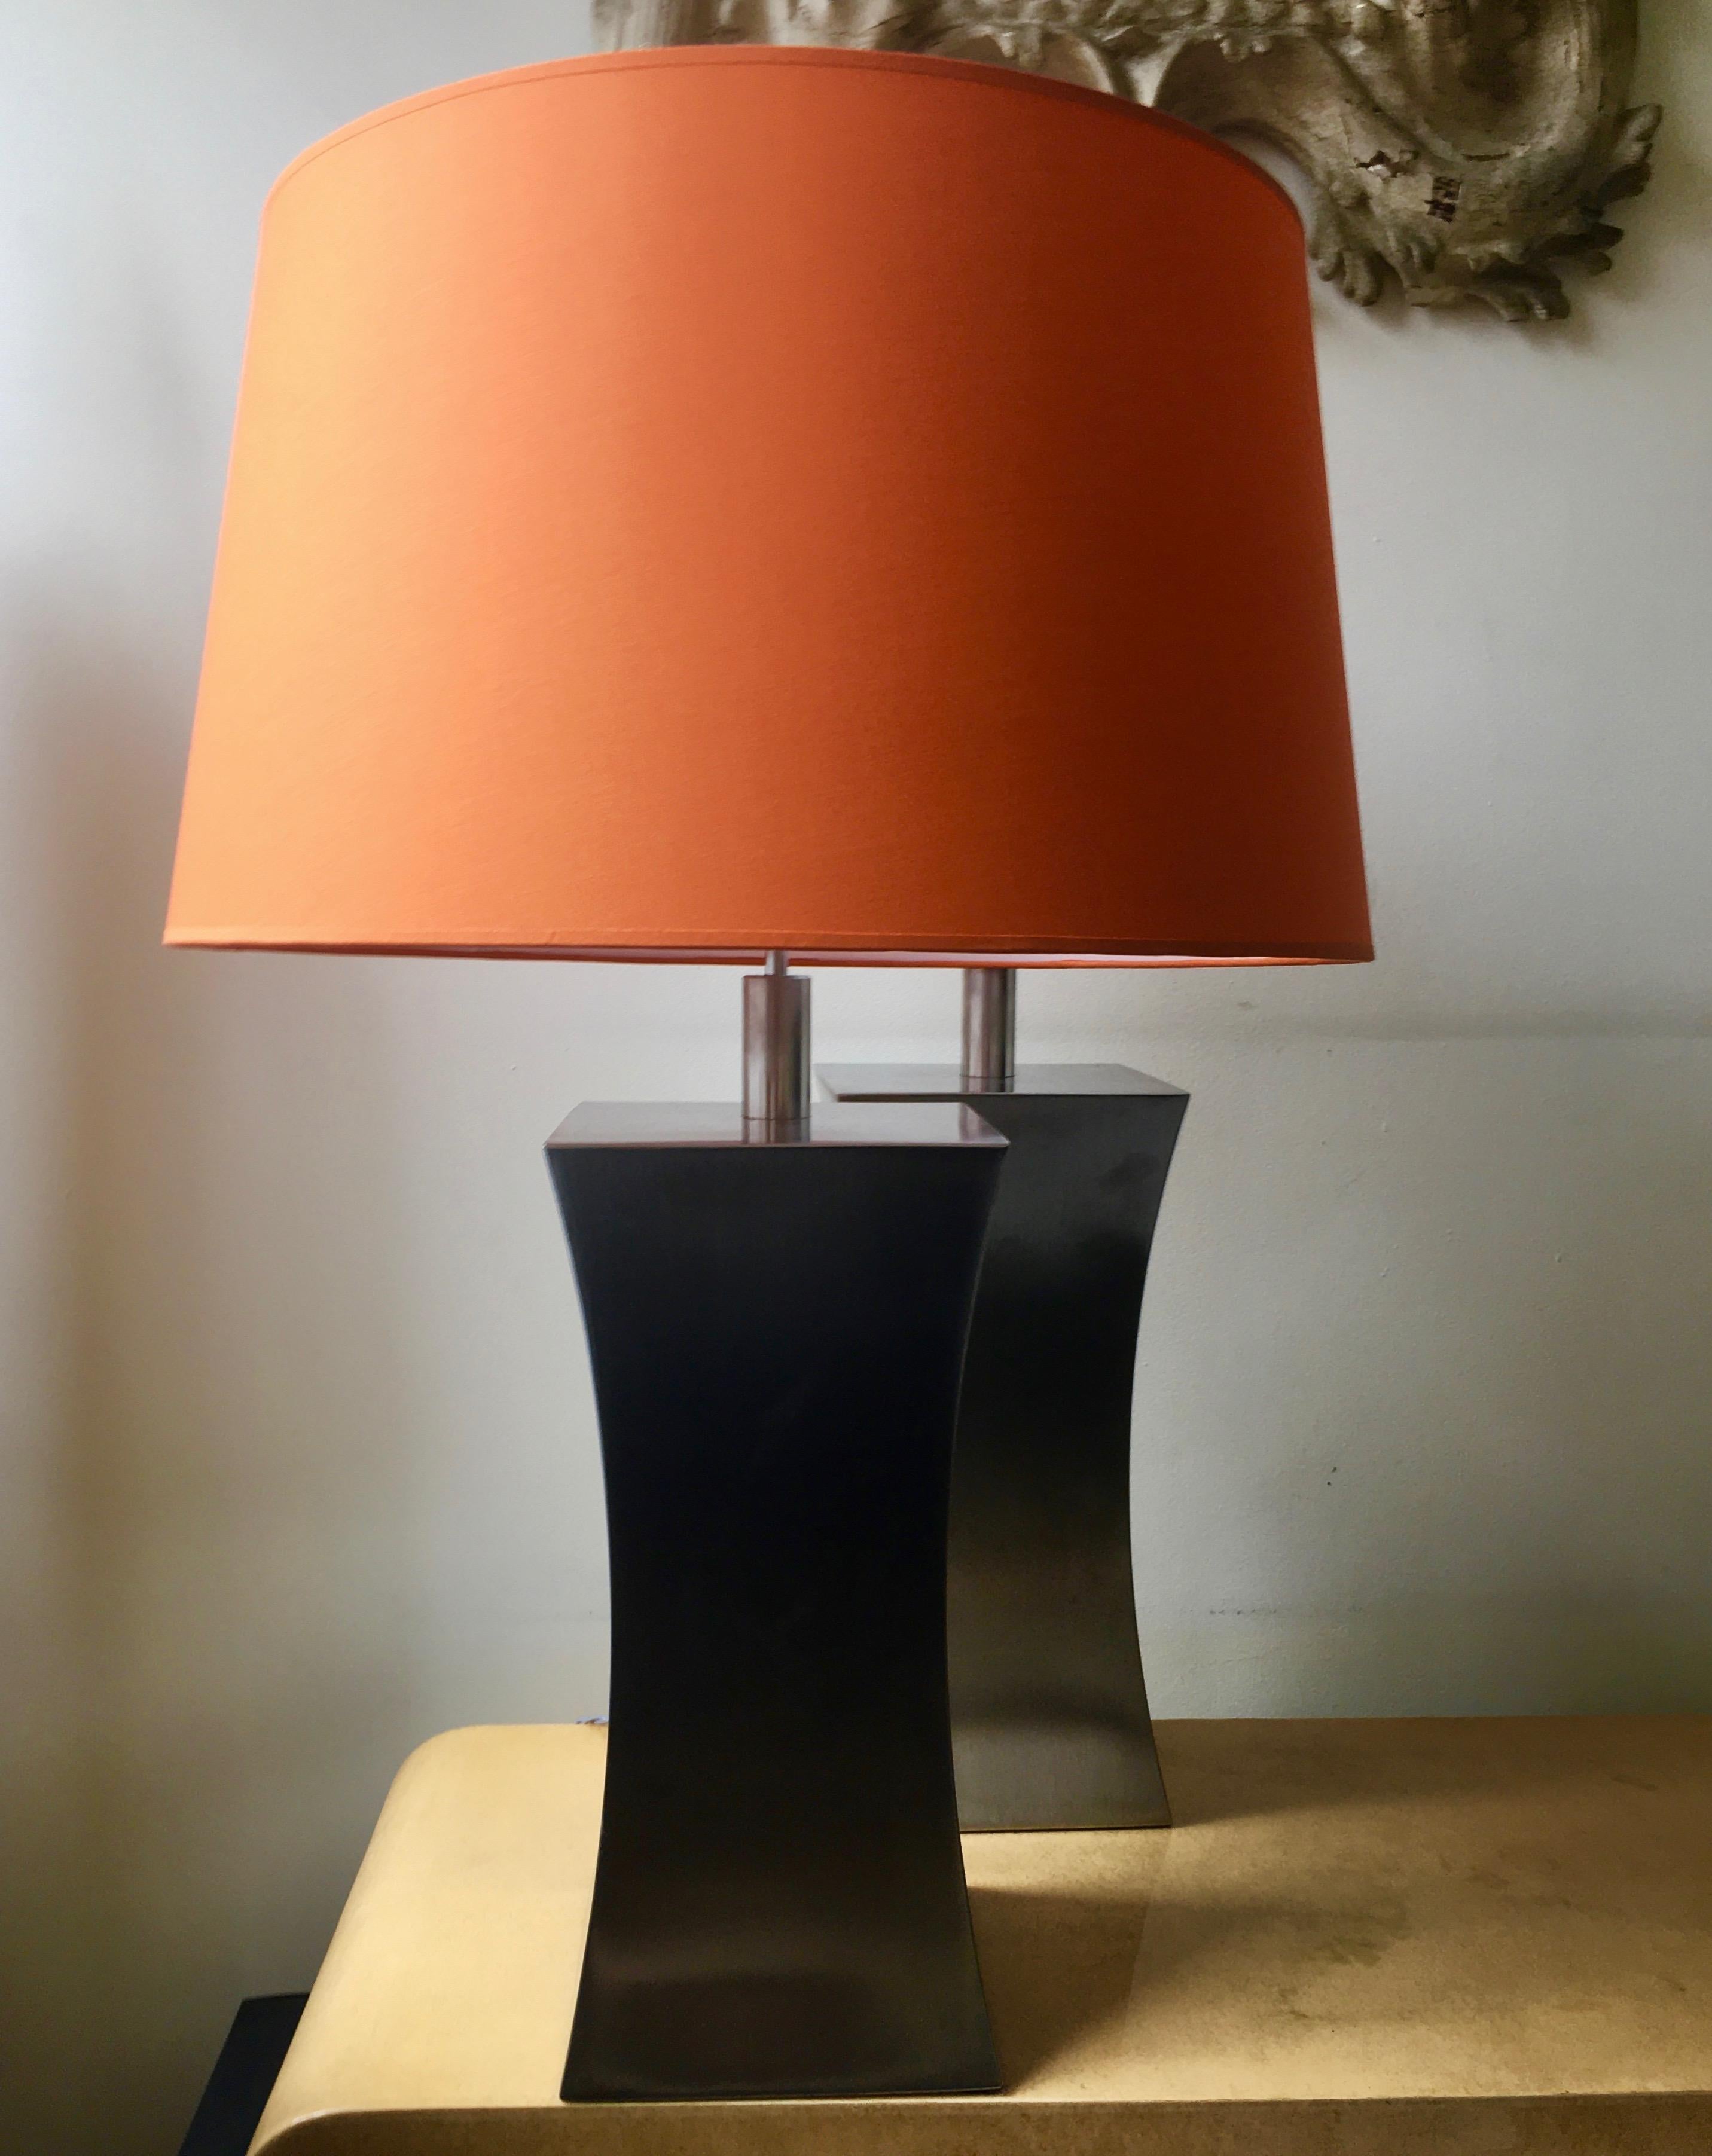 Stainless Steel Pair of Steel Table Lamps with Orange Lampshades by Françoise Sée, France, 1970